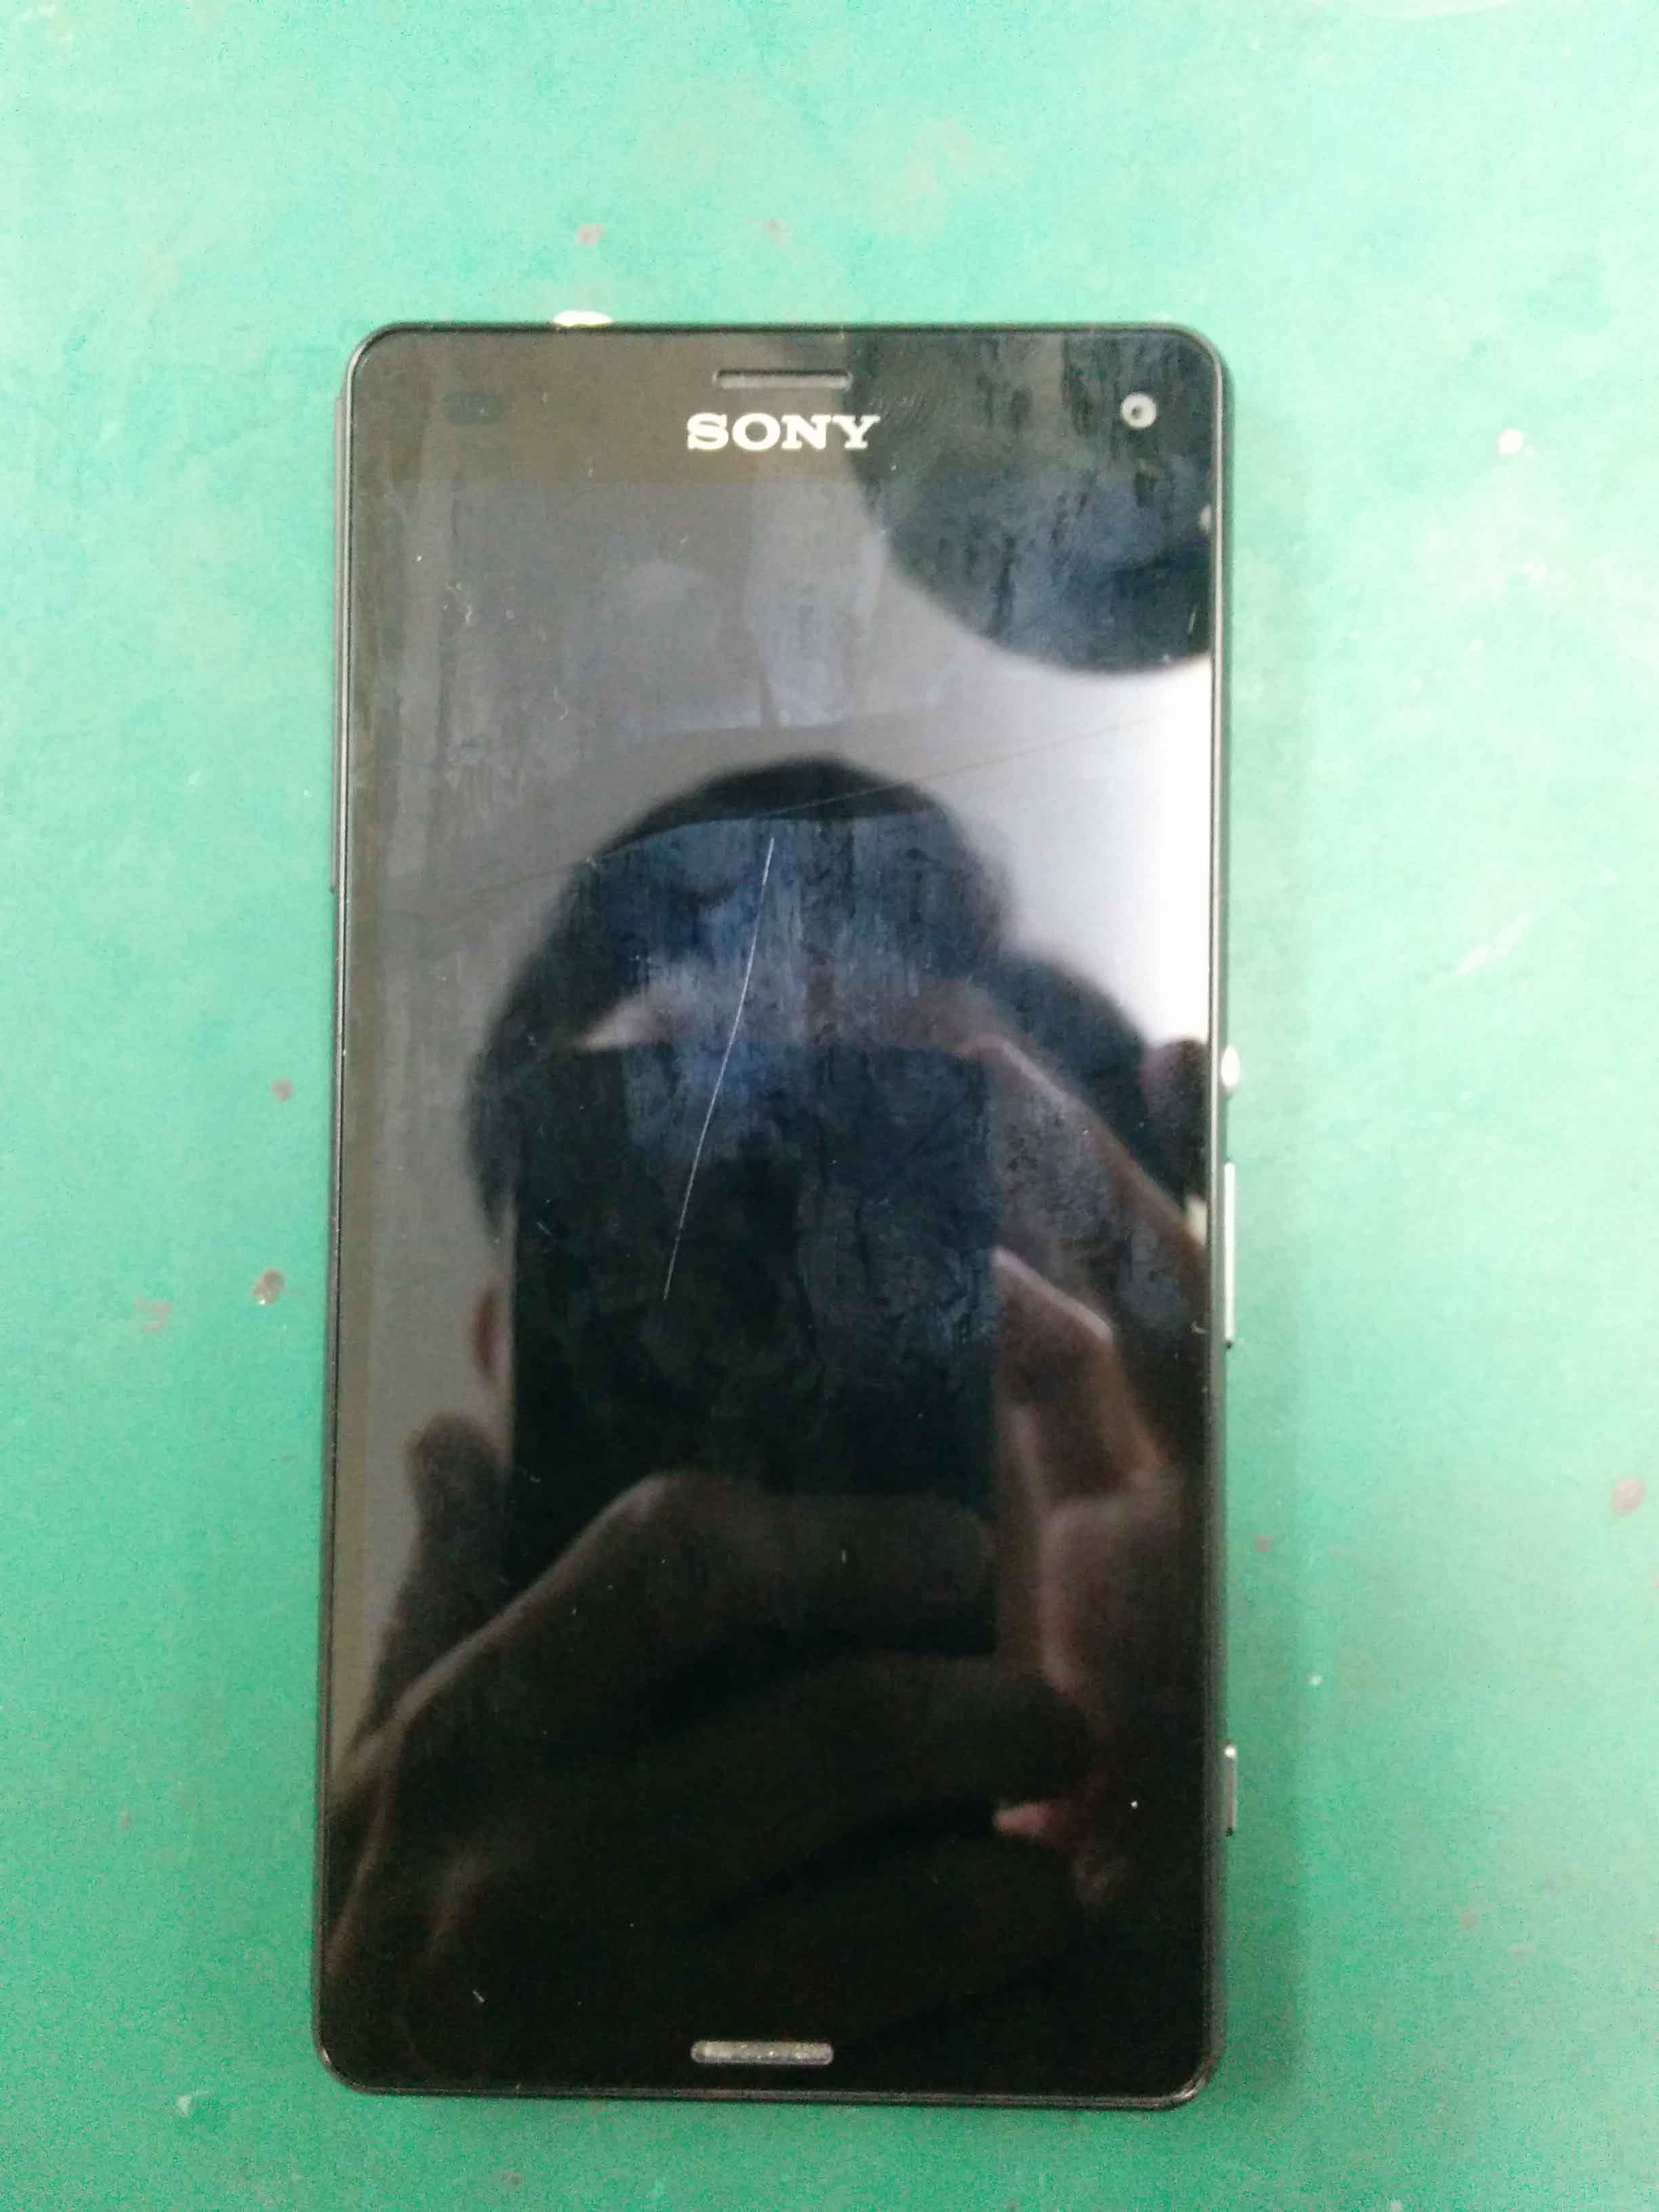 Xperia Z3 compactの画面割れ修理